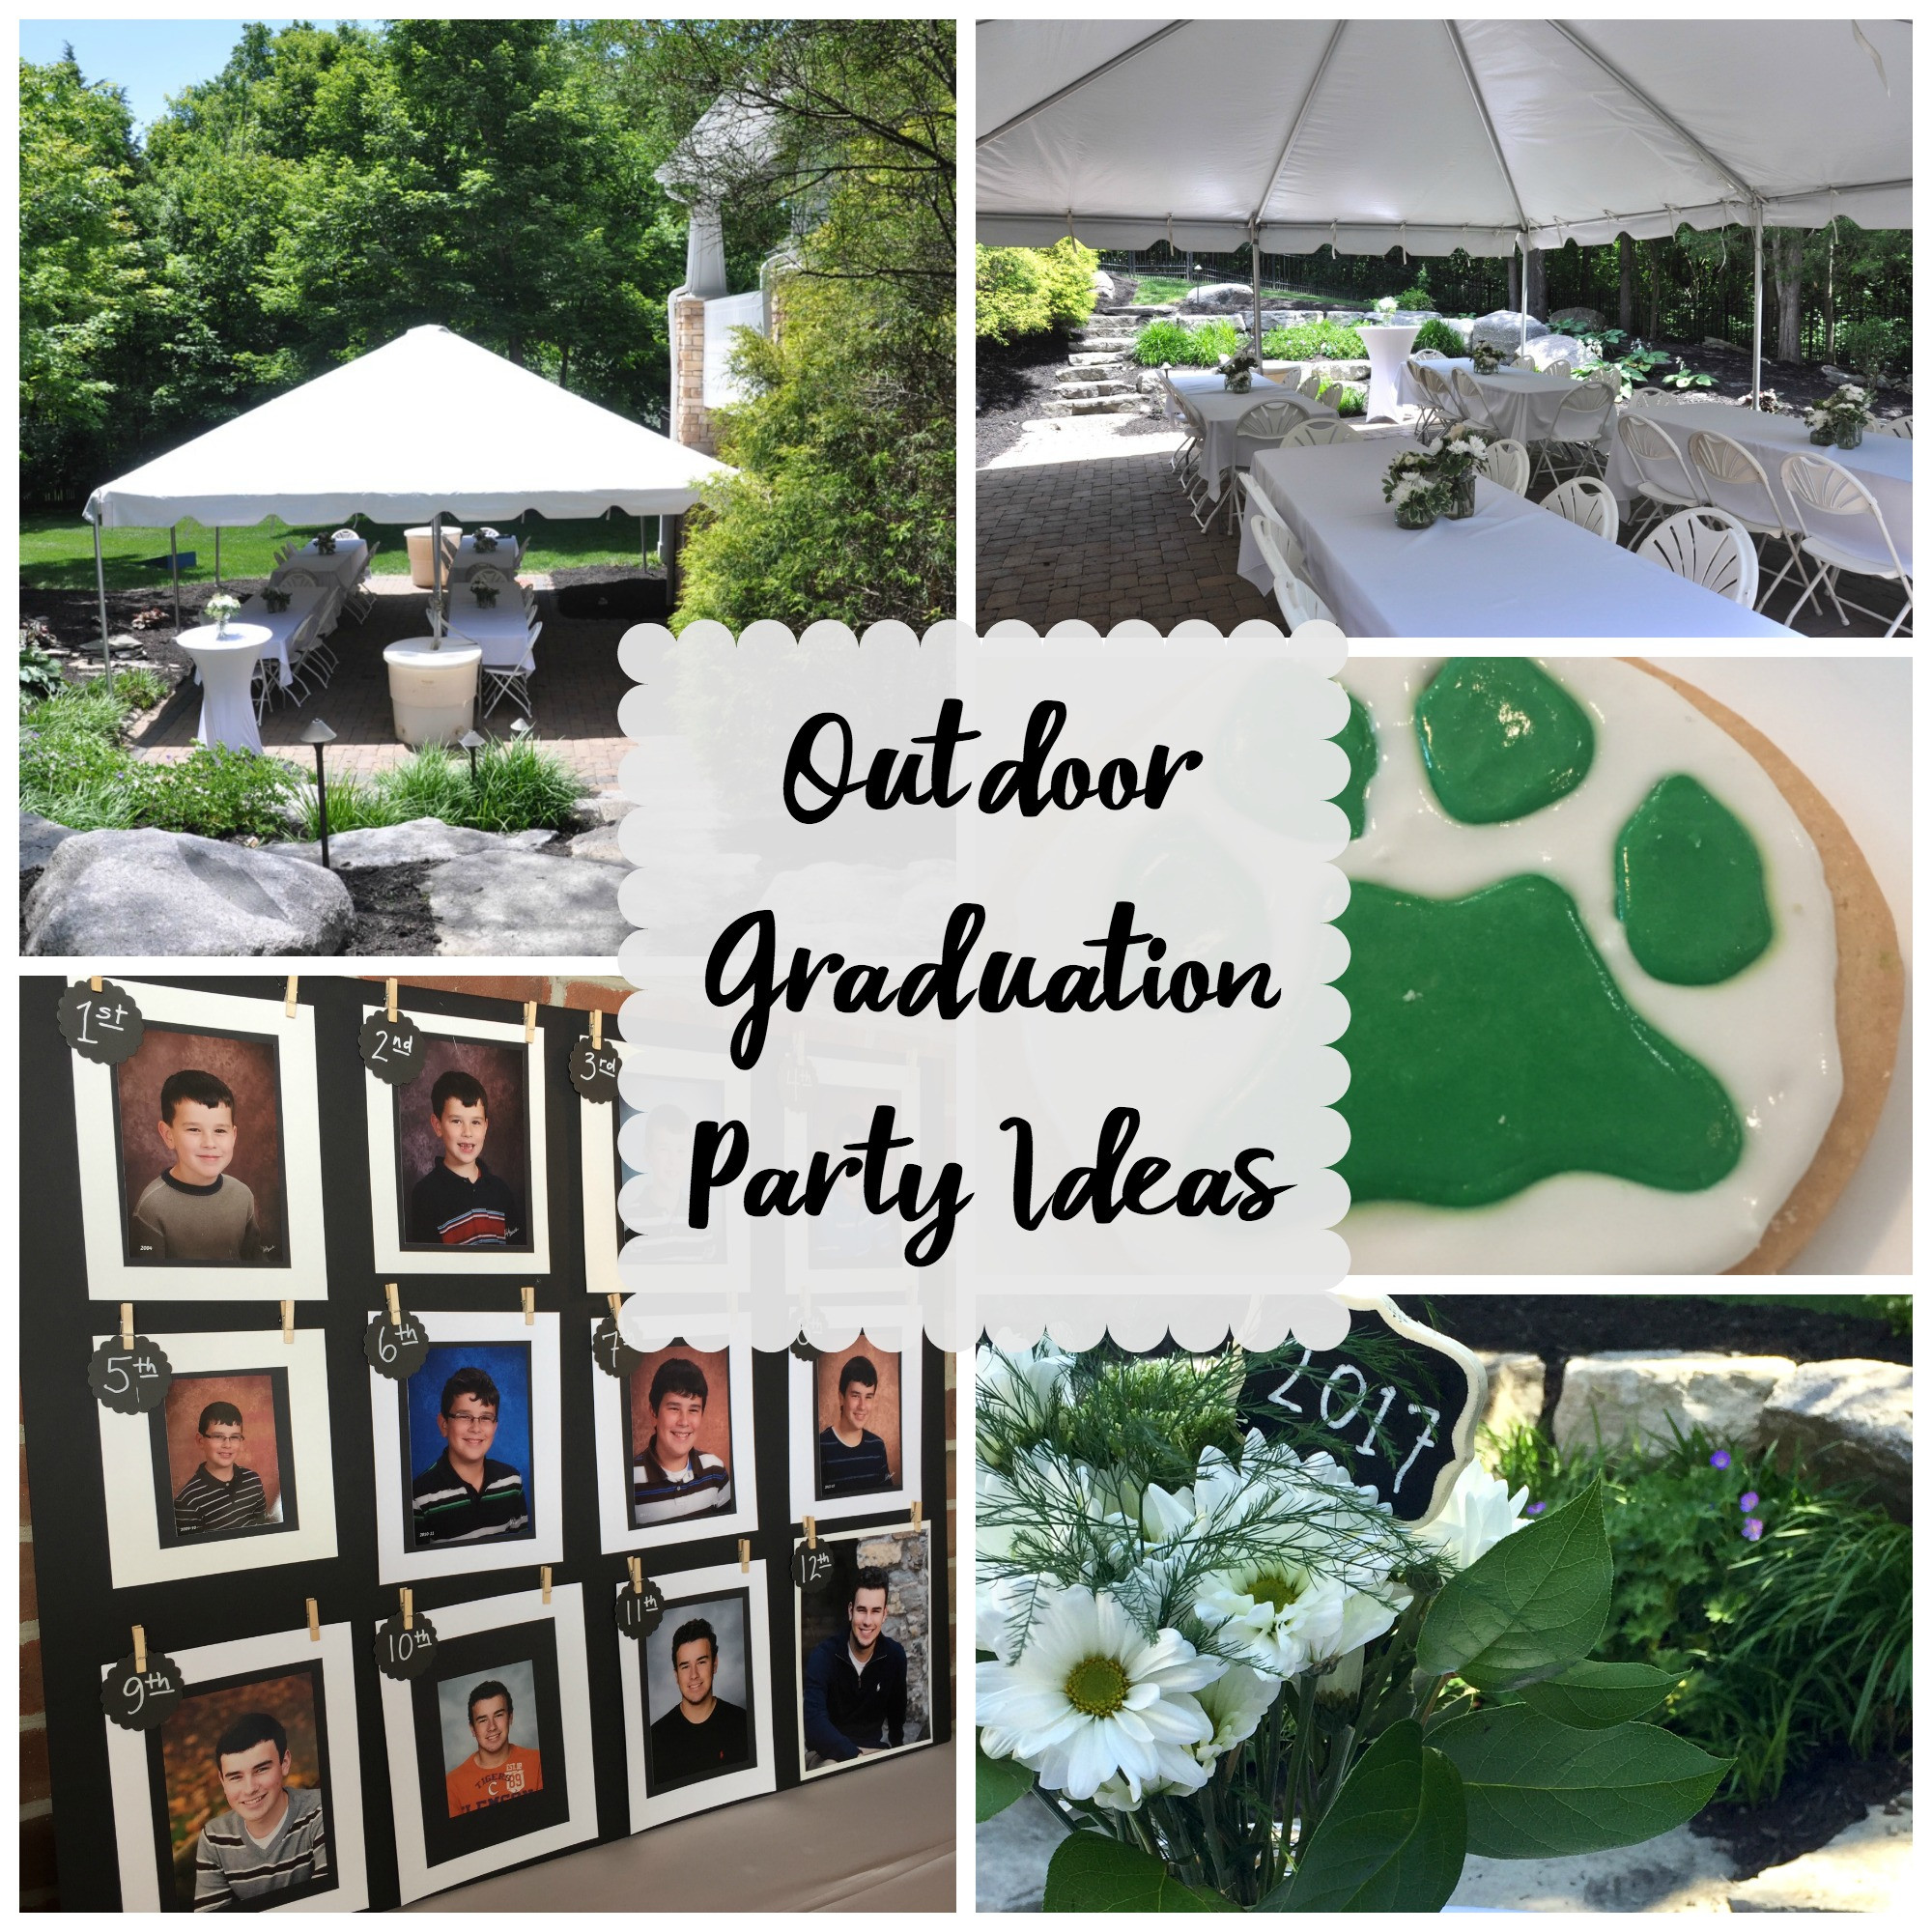 Graduation Party Ideas For A Small Backyard
 Outdoor Graduation Party Evolution of Style